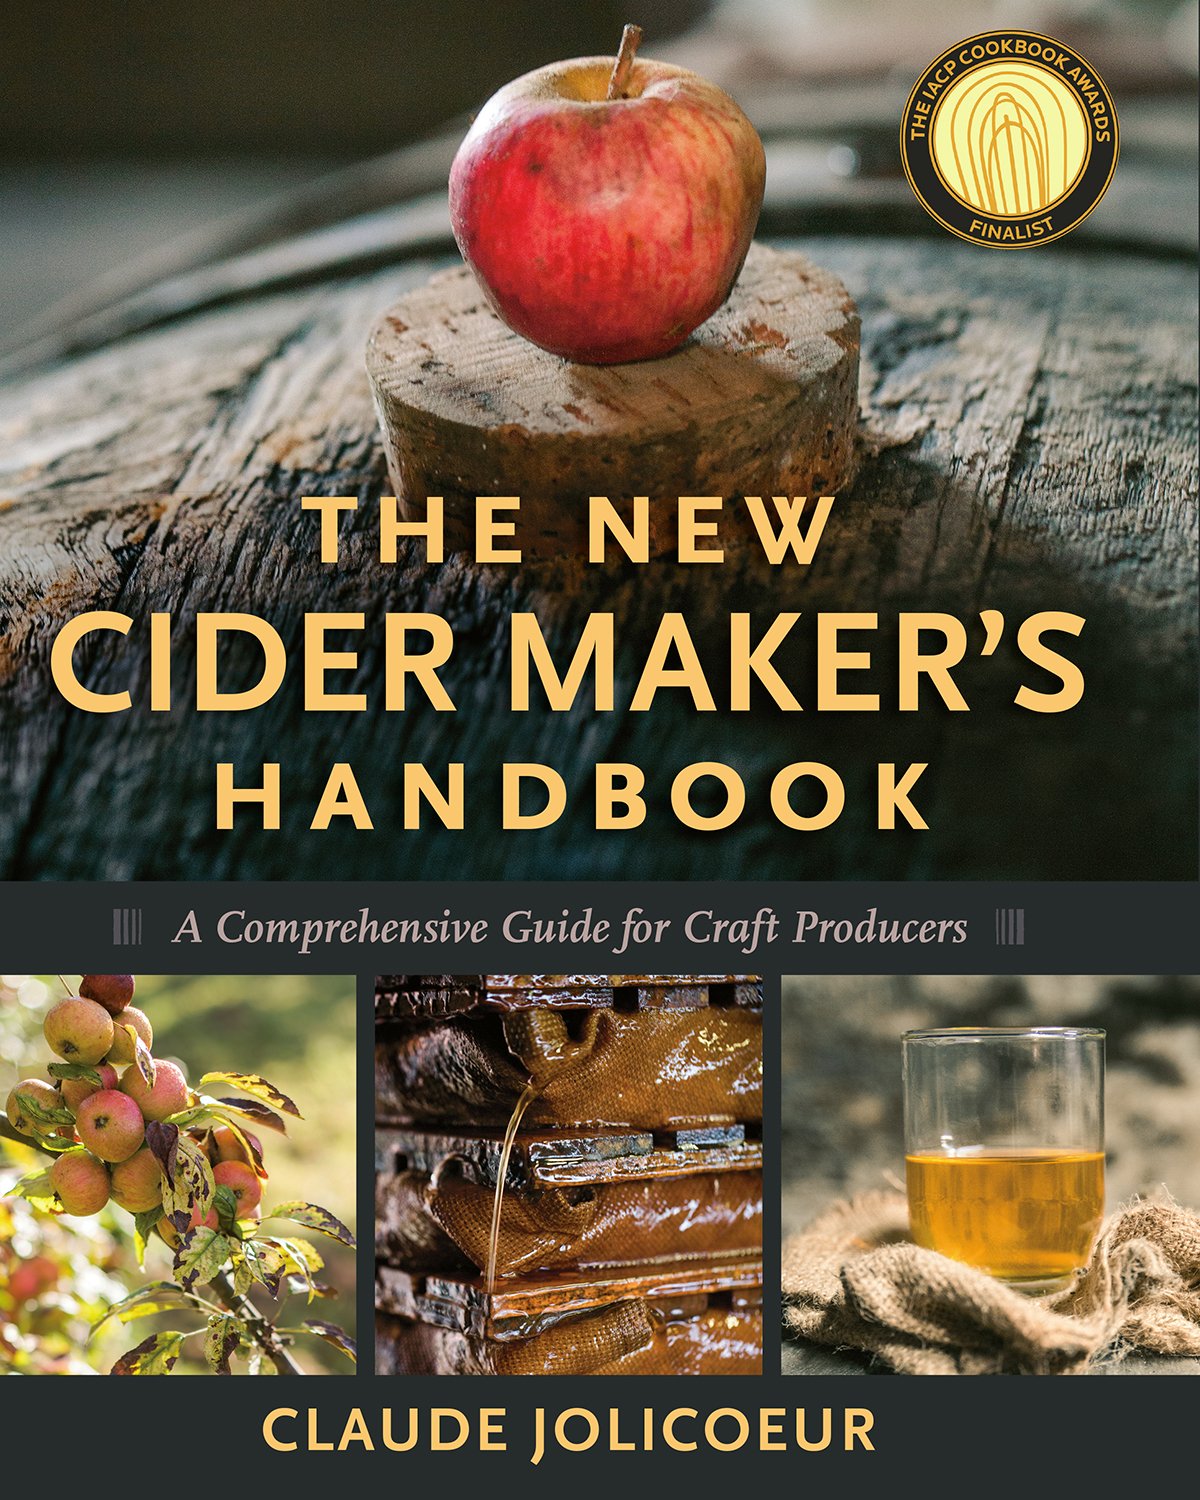 The New Cider Maker's Handbook: A Comprehensive Guide for Craft Producers (Claude Jolicoeur)